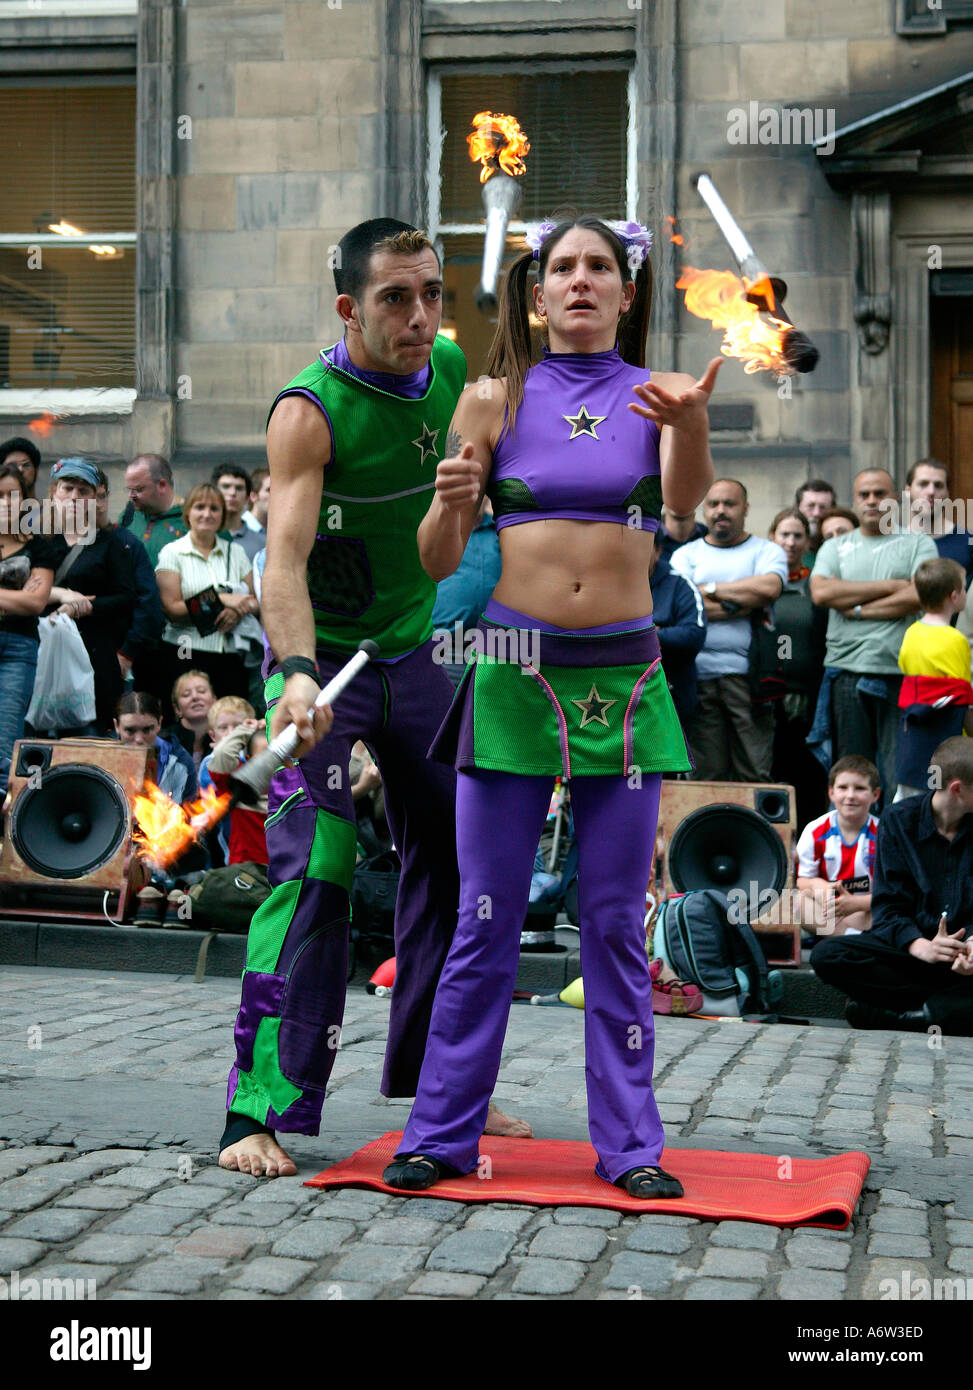 Male and female Street Performers juggling fire torches at the Edinburgh Fringe Festival Scotland UK 2004 Stock Photo